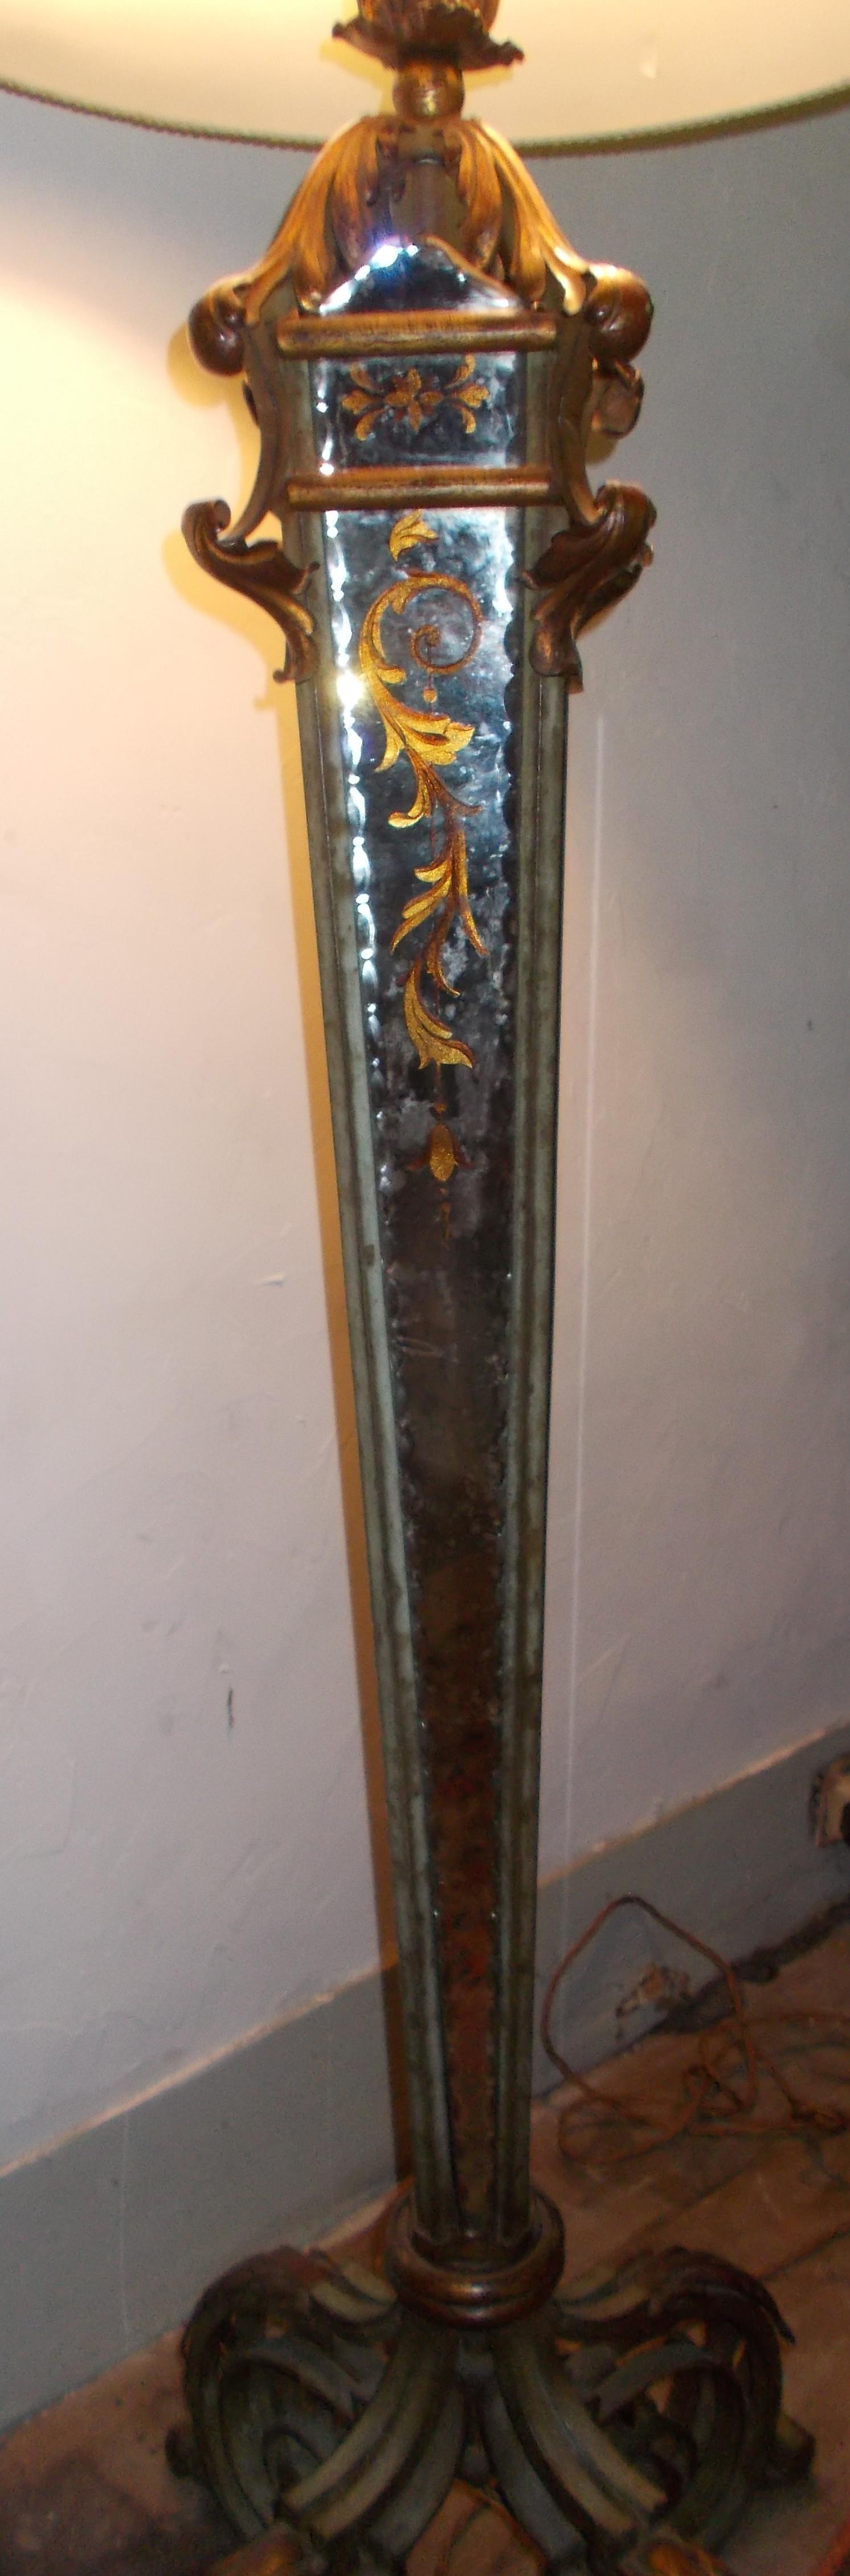 Serge Roche Attributed Parcel-Gilt Wrought Iron and Verre Églomisé Floor Lamp For Sale 1